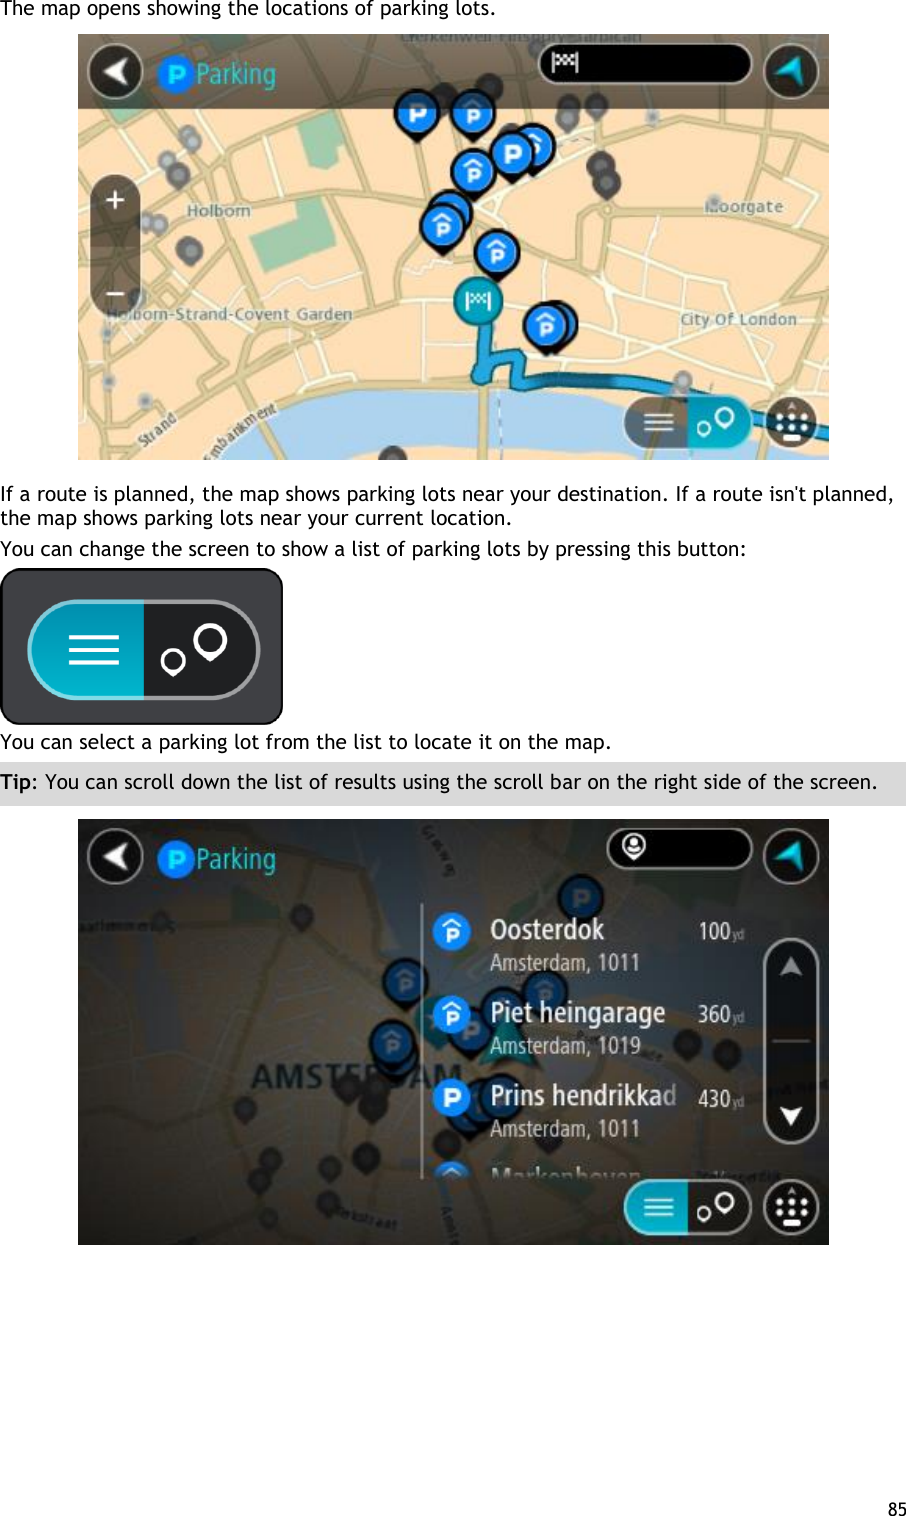  85  The map opens showing the locations of parking lots.  If a route is planned, the map shows parking lots near your destination. If a route isn&apos;t planned, the map shows parking lots near your current location. You can change the screen to show a list of parking lots by pressing this button:  You can select a parking lot from the list to locate it on the map. Tip: You can scroll down the list of results using the scroll bar on the right side of the screen.  